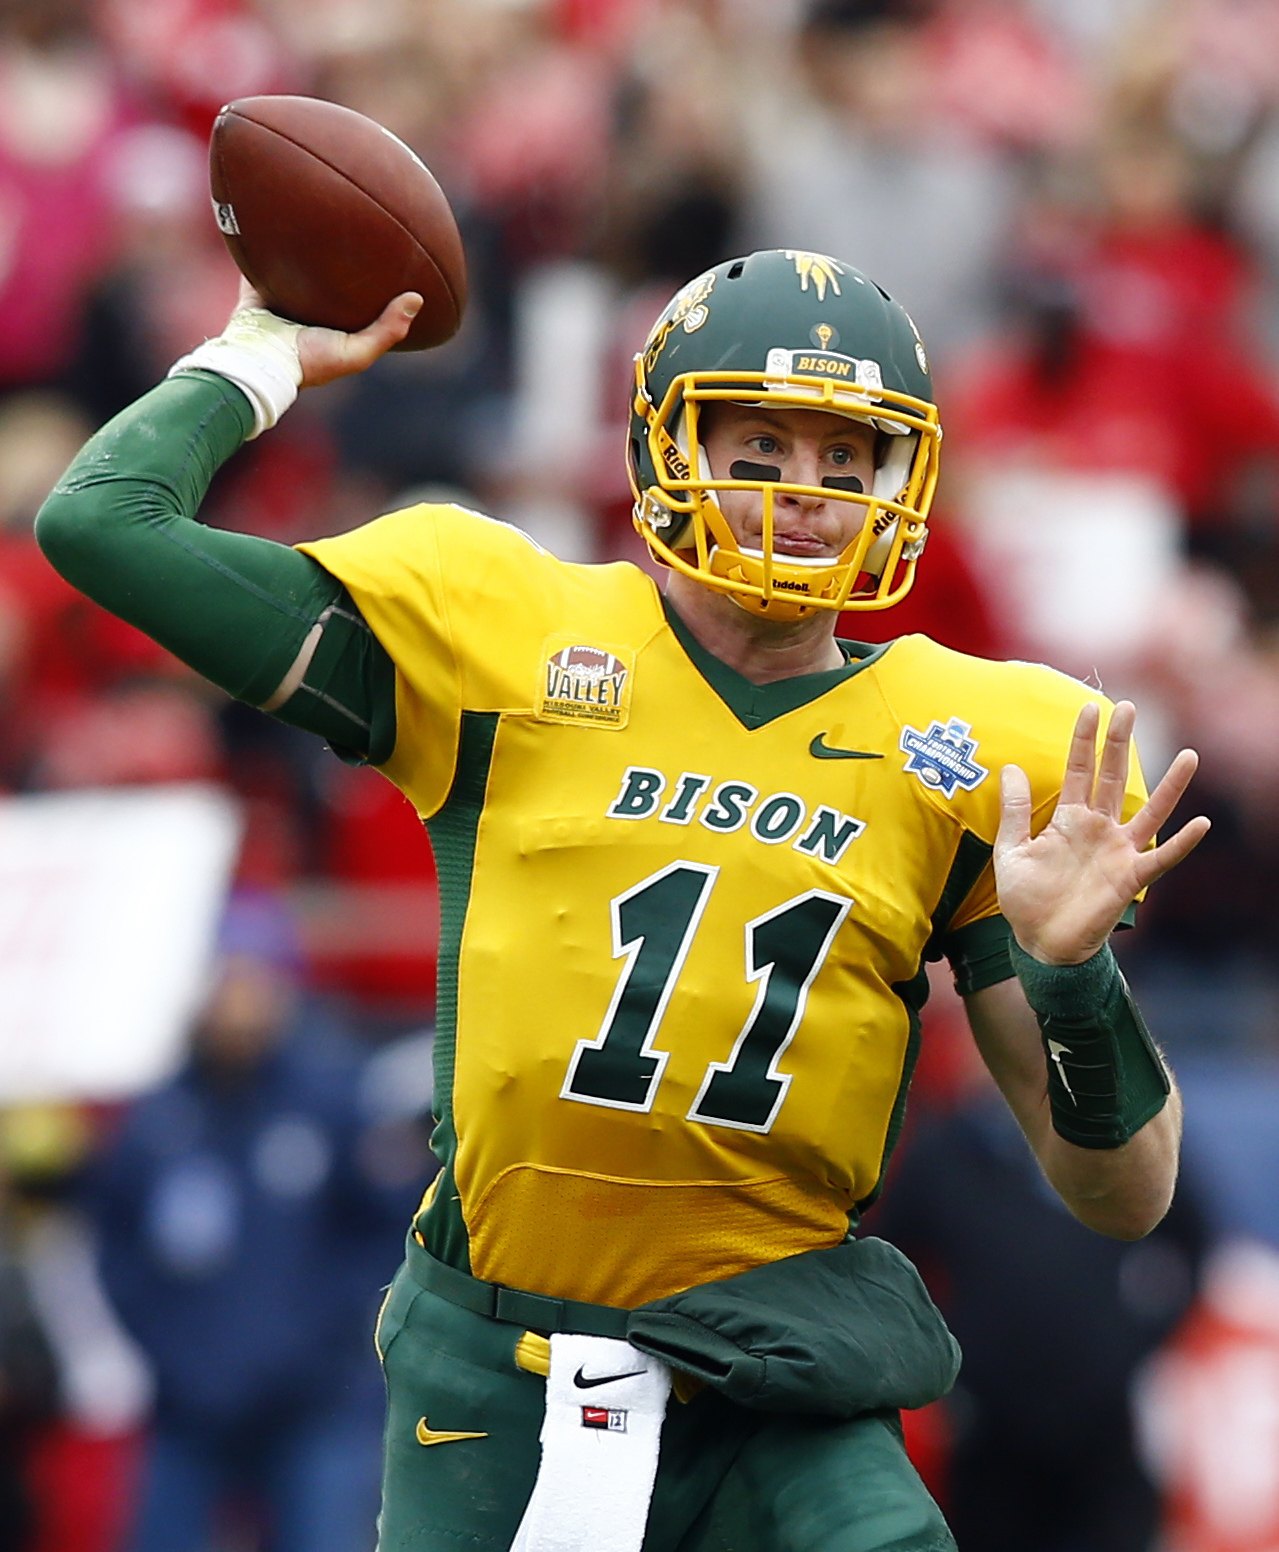 North Dakota State’s Carson Wentz could be the Los Angeles Rams quarterback of the future if he is selected with the first overall pick in next week’s NFL draft.